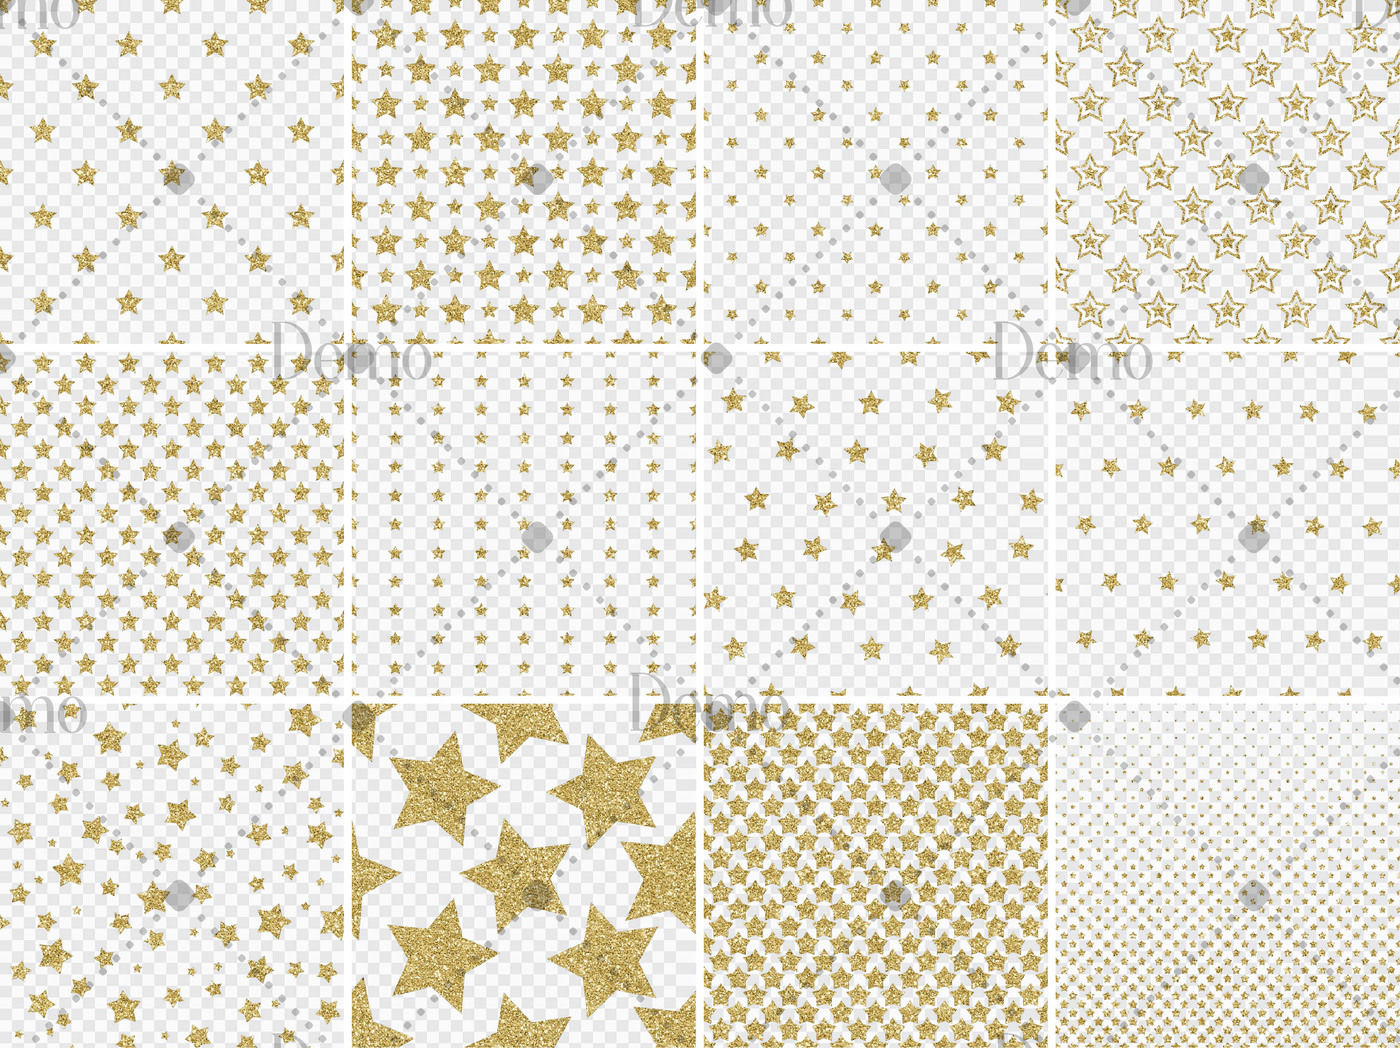 Download 12 Gold Glitter Star Overlay Images Seamless Pattern By Artinsider Thehungryjpeg Com